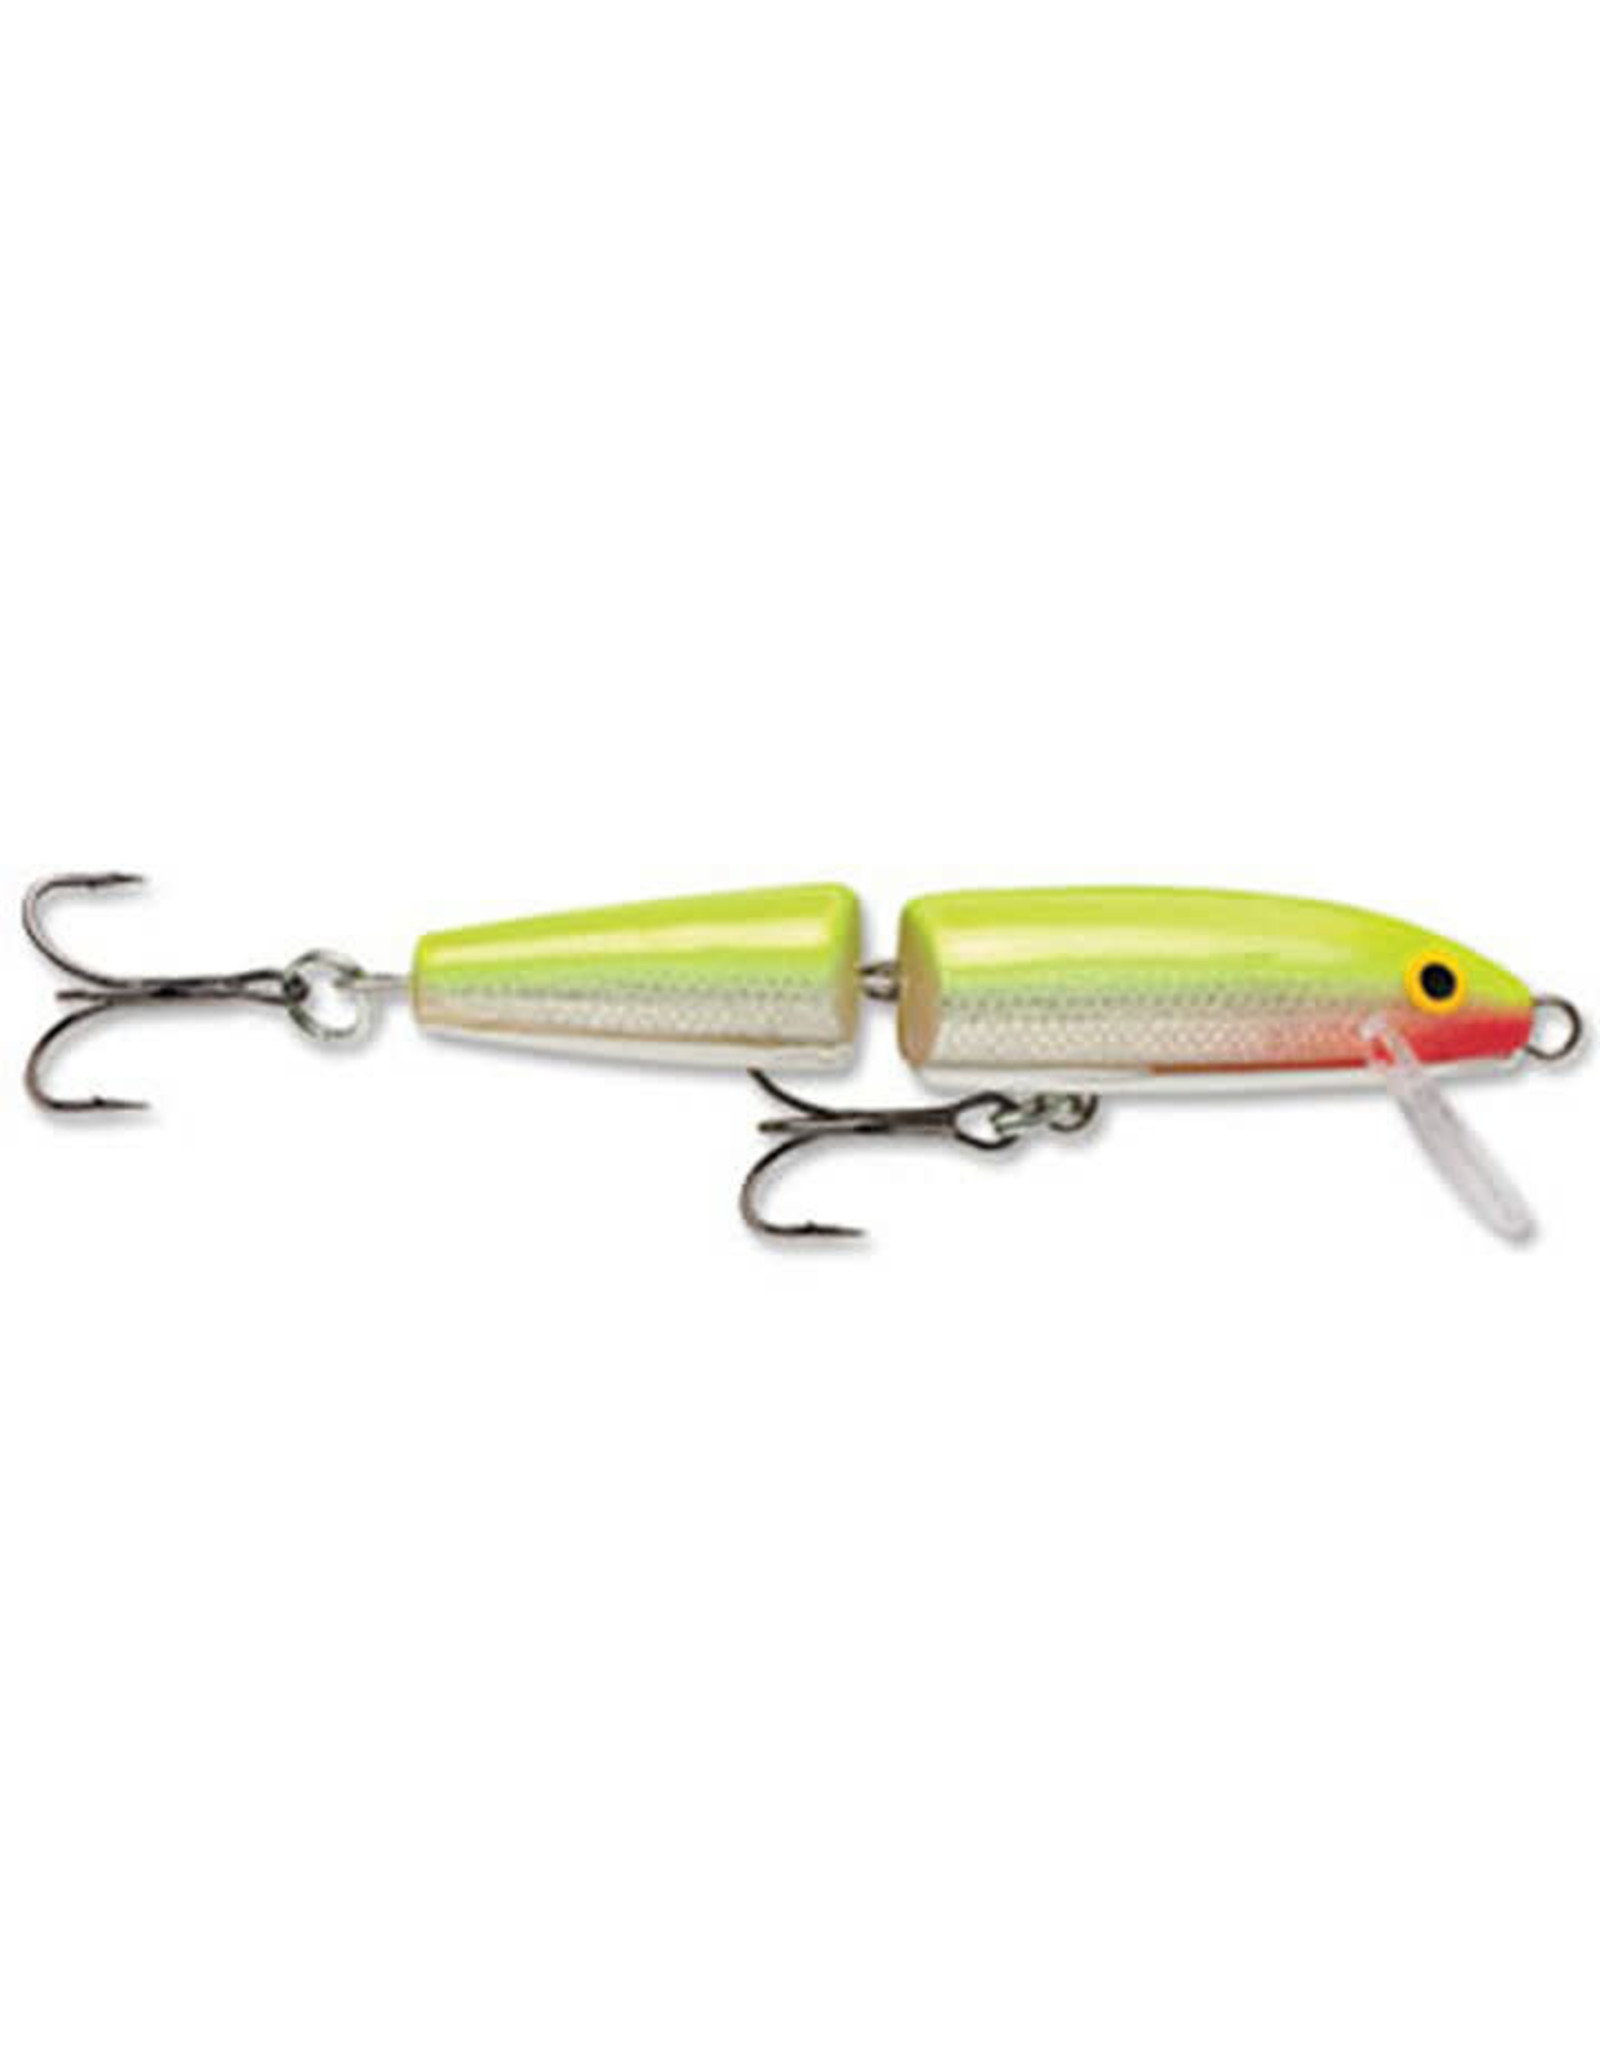 Rapala Rapala Jointed Minnow 1/8 oz Silver Fluorescent